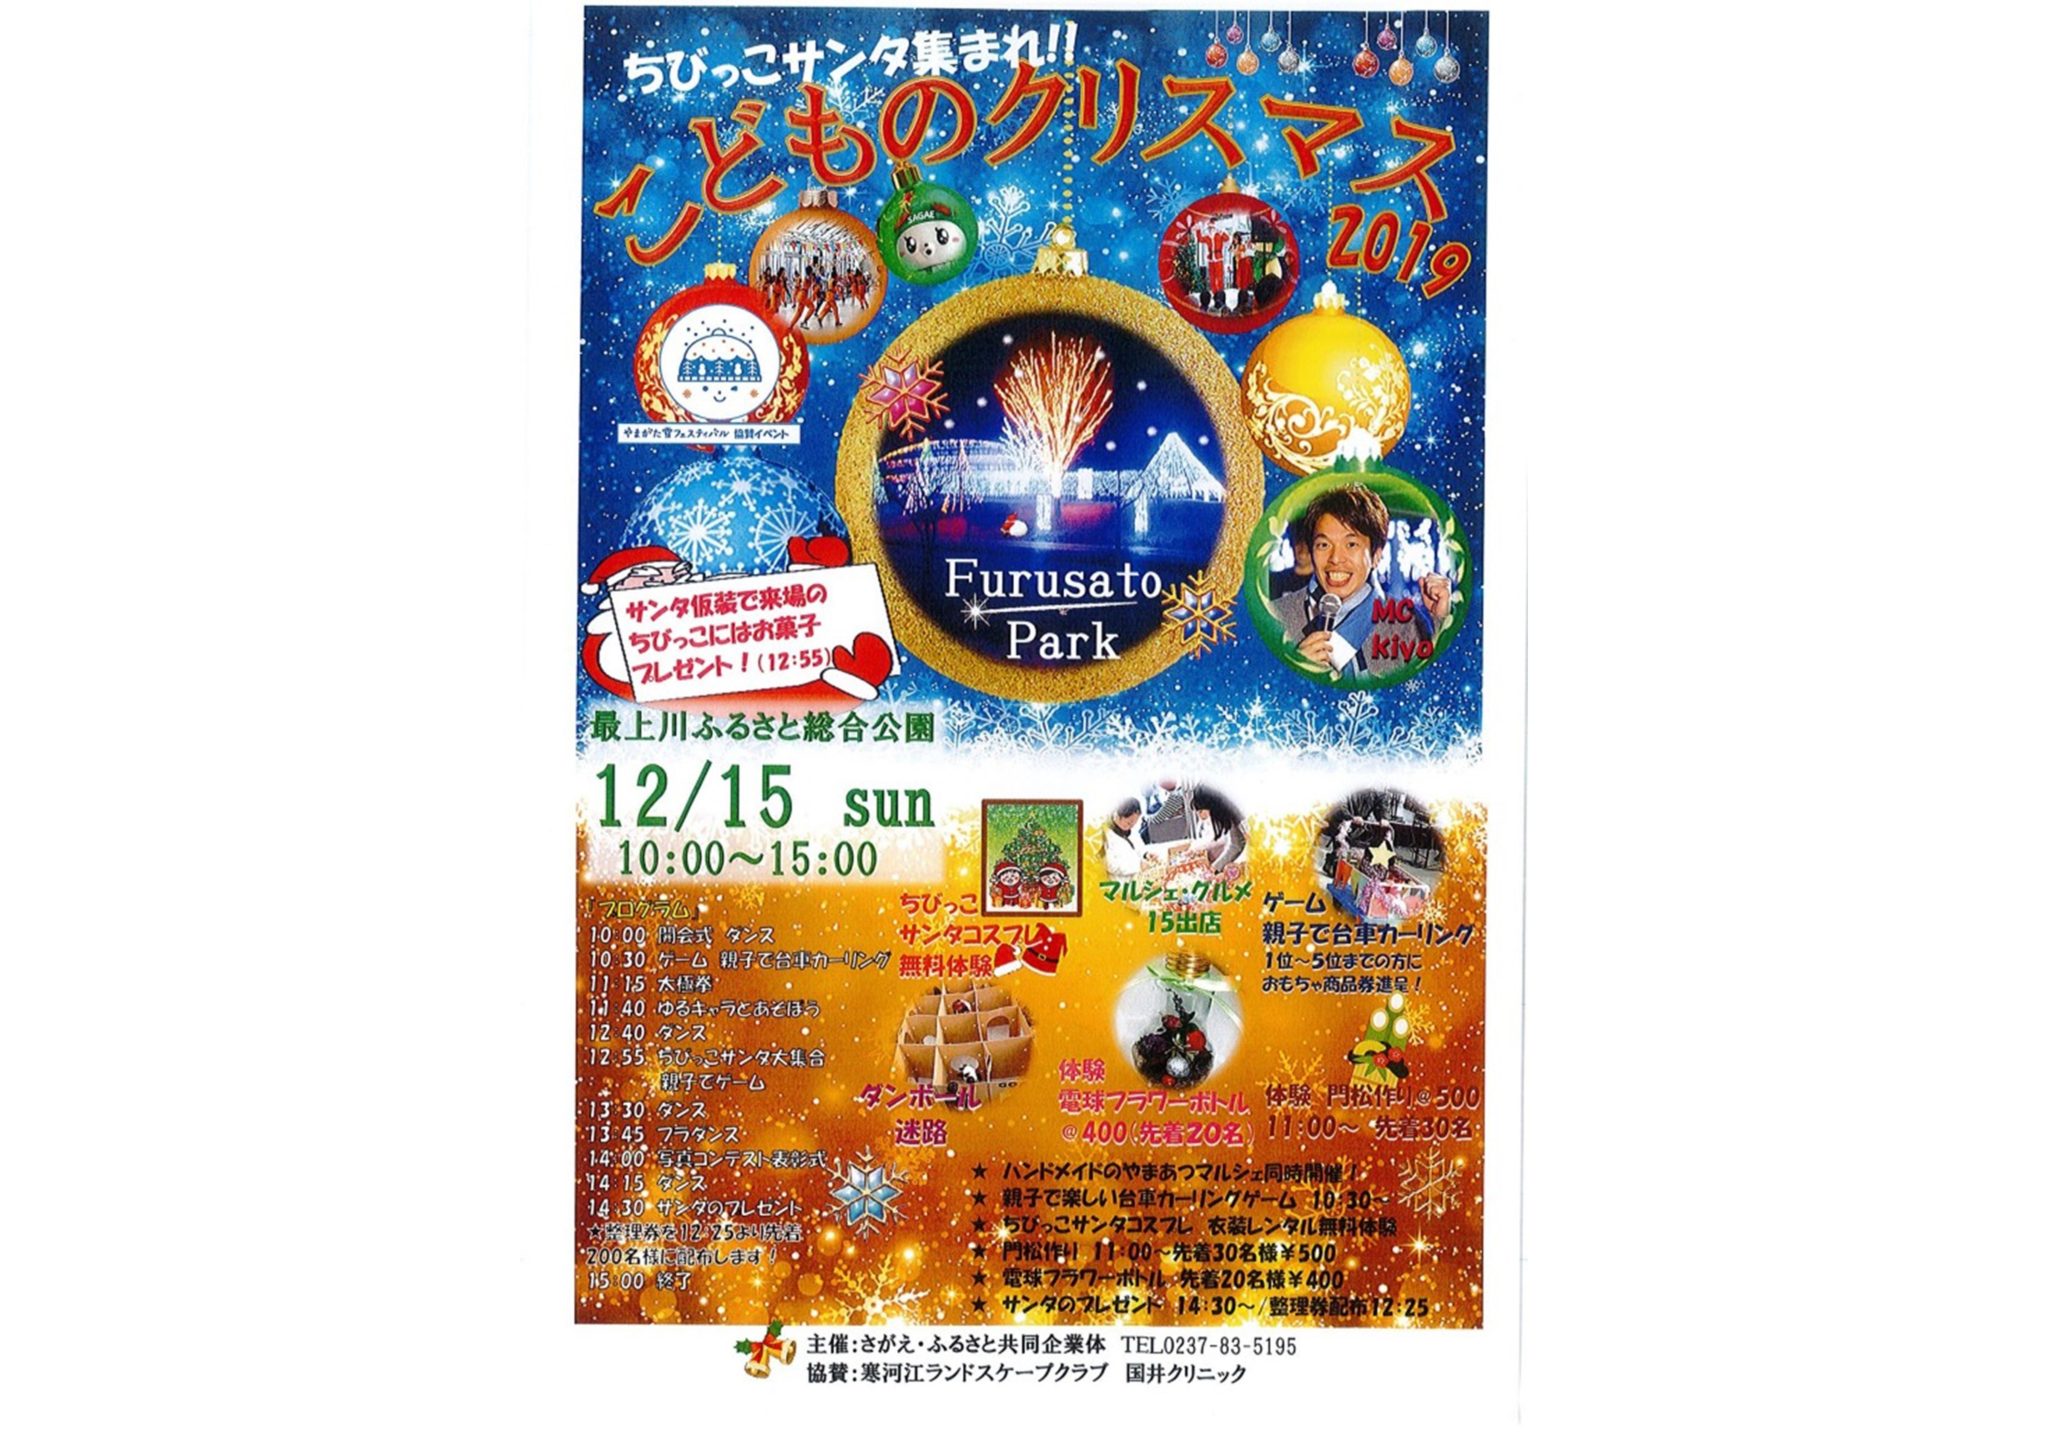 「Christmas Party こどものクリスマス in 最上川ふるさと総合公園」